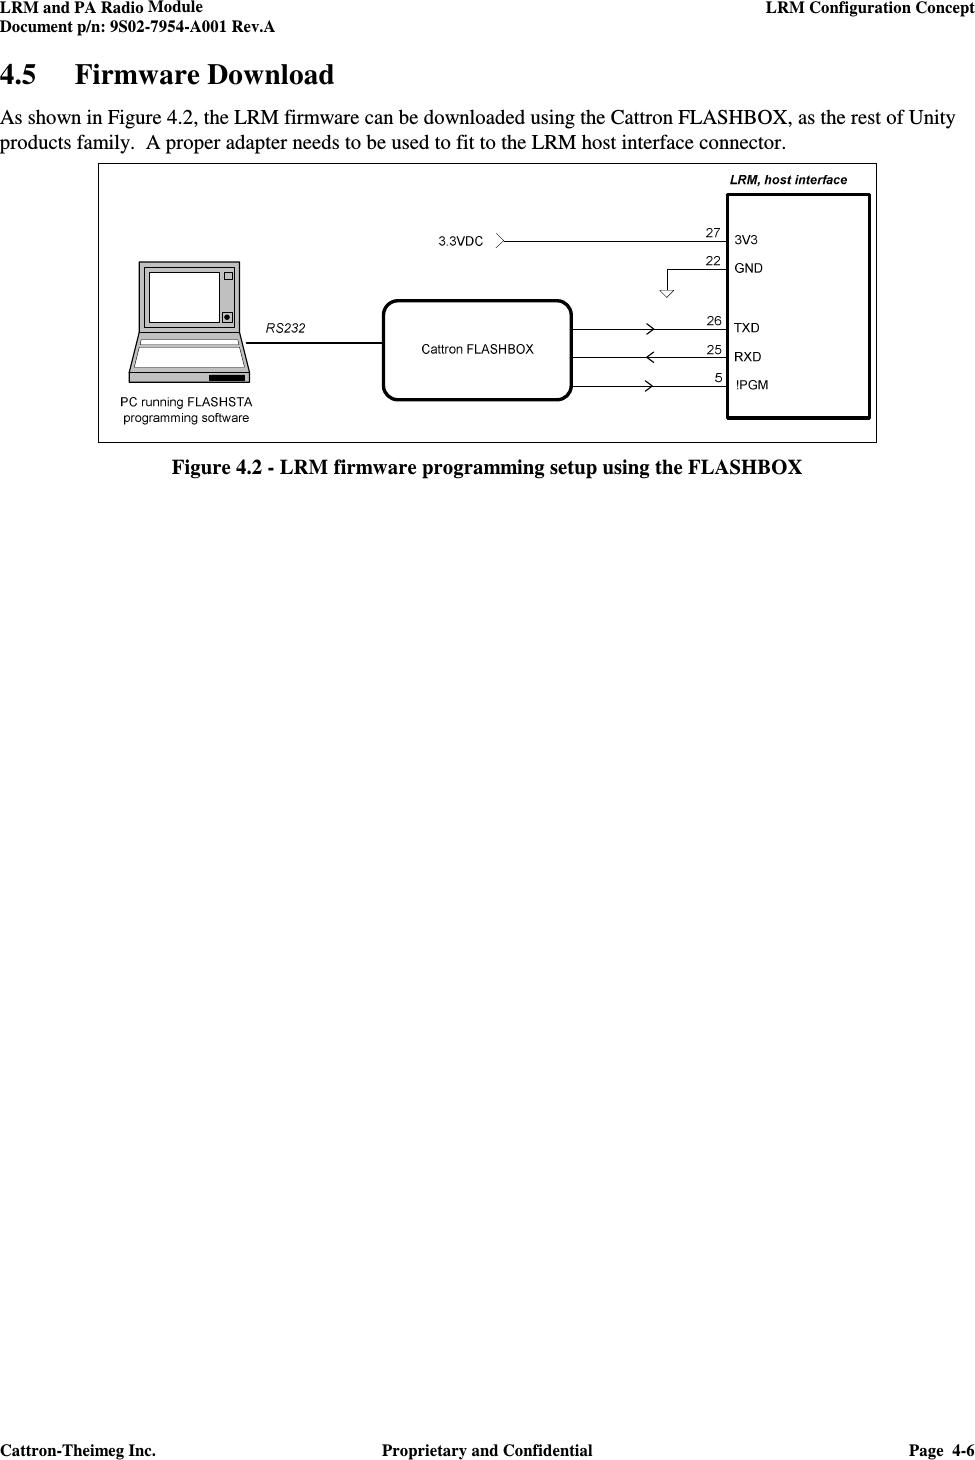 LRM and PA Radio Module    LRM Configuration Concept  Document p/n: 9S02-7954-A001 Rev.A  Cattron-Theimeg Inc.  Proprietary and Confidential  Page  4-6  4.5 Firmware Download As shown in Figure 4.2, the LRM firmware can be downloaded using the Cattron FLASHBOX, as the rest of Unity products family.  A proper adapter needs to be used to fit to the LRM host interface connector.    Figure 4.2 - LRM firmware programming setup using the FLASHBOX    